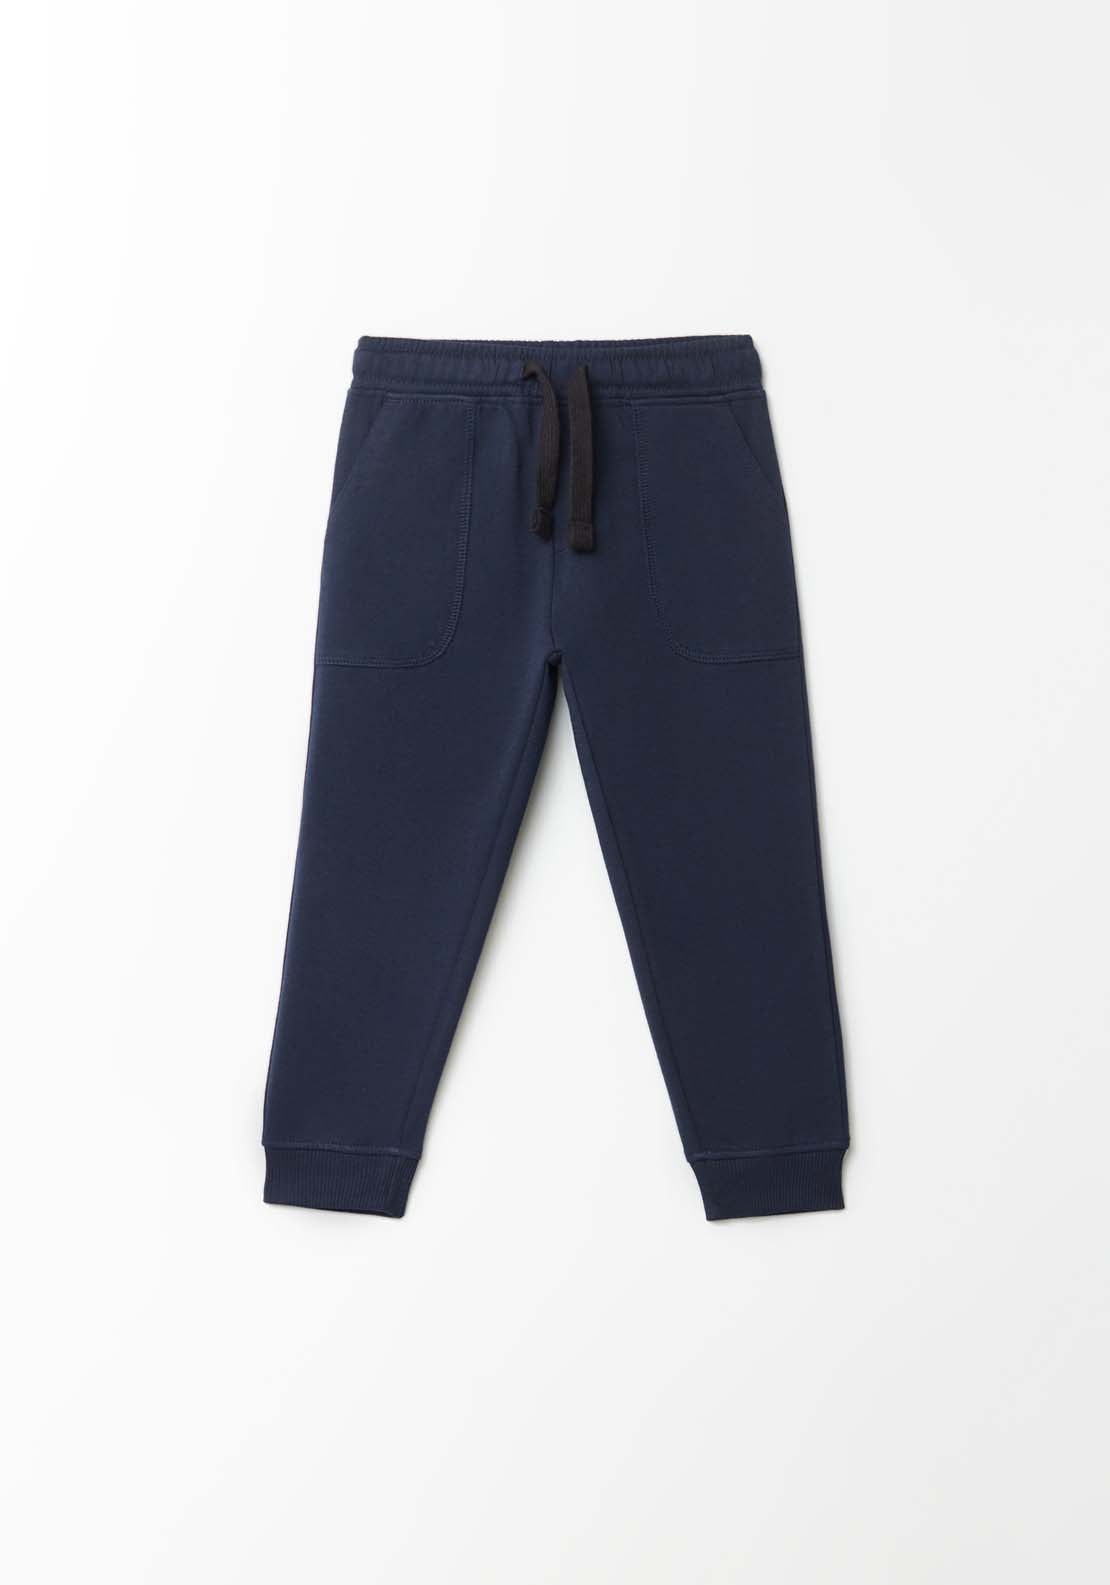 Sfera Basic Joggers With Pockets - Navy / Blue 1 Shaws Department Stores